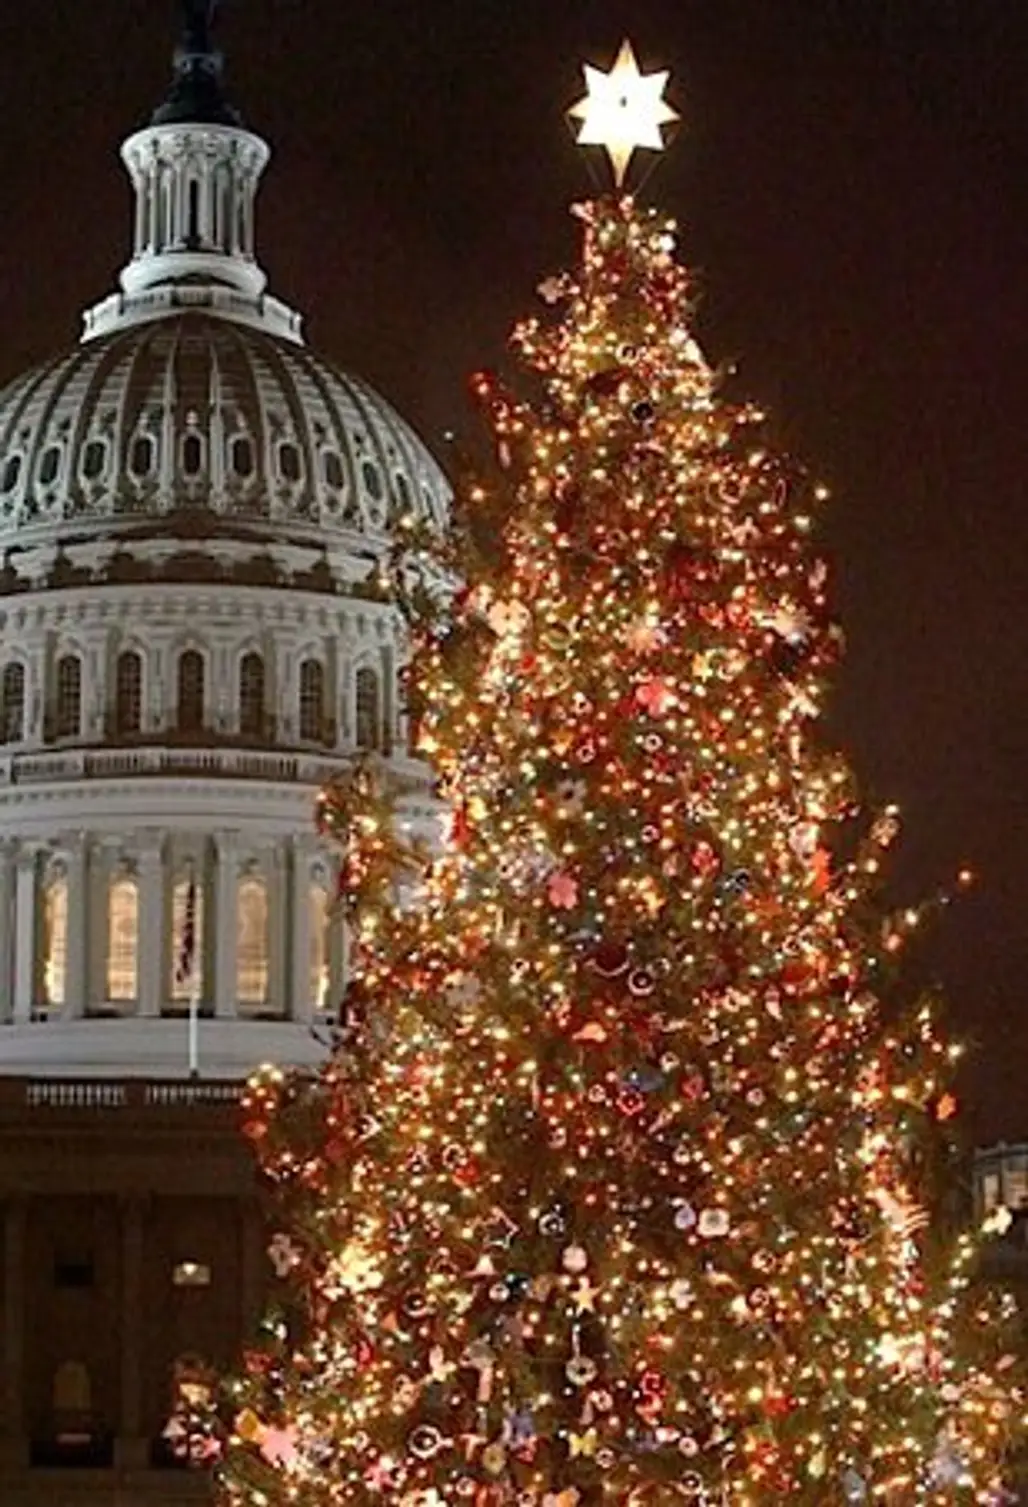 The Capitol Christmas Tree in Washington, D.C